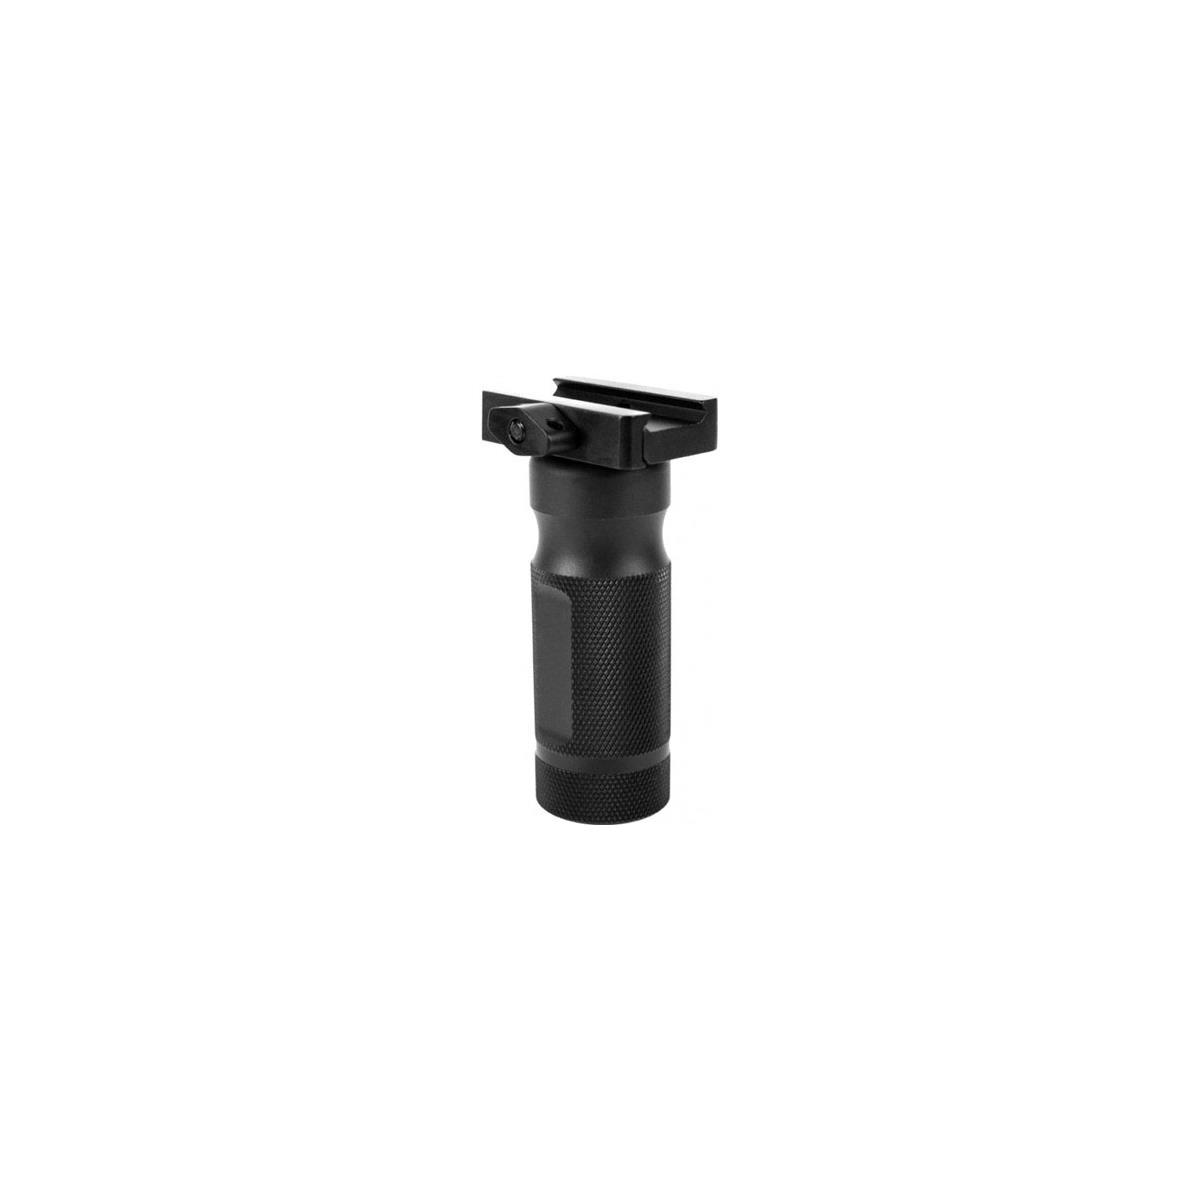 AIM Sports Aim Sports Small Tactical Vertical Foregrip for Weaver/Picatinny 1913 Rails -  PJTSG